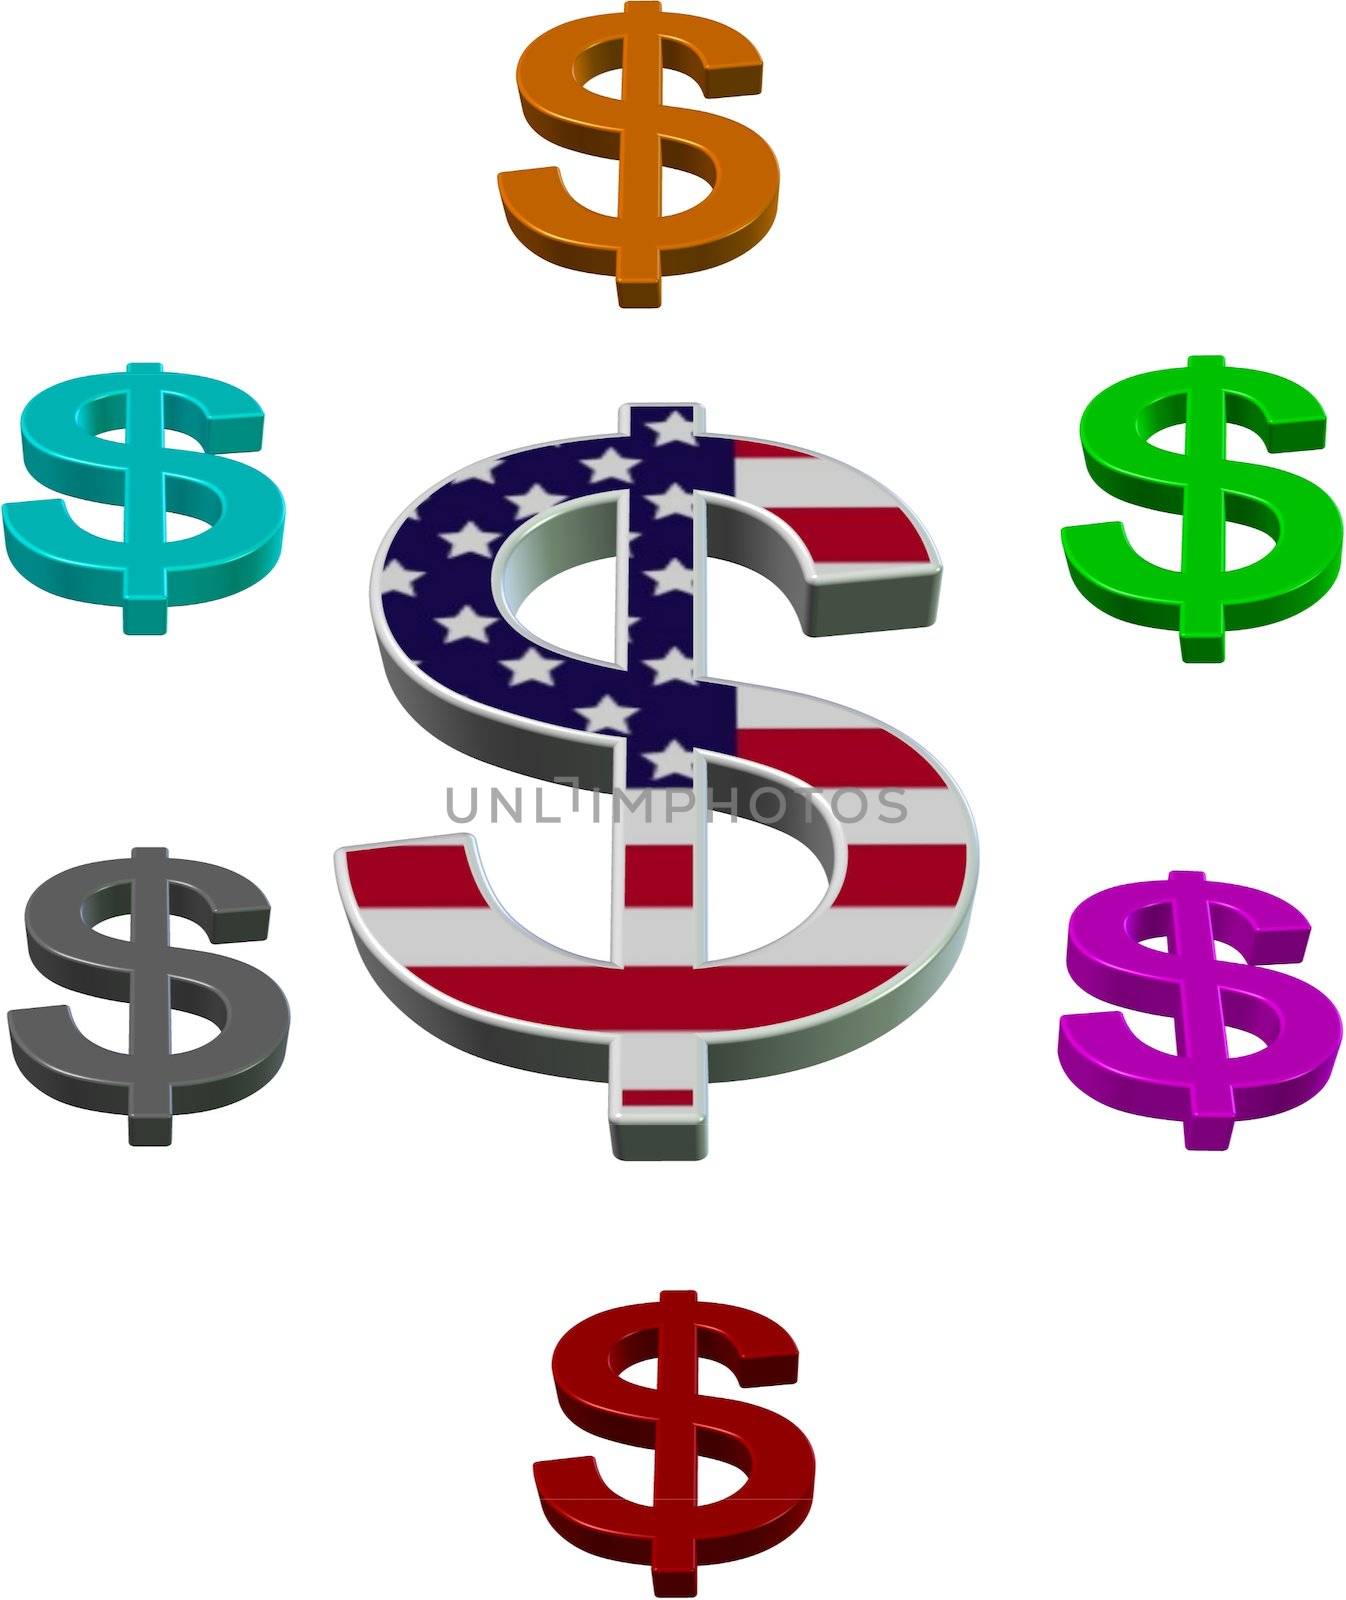 a 3d illustration of dollar textured in USA flag surrounded by 3d dollar symbols in colours